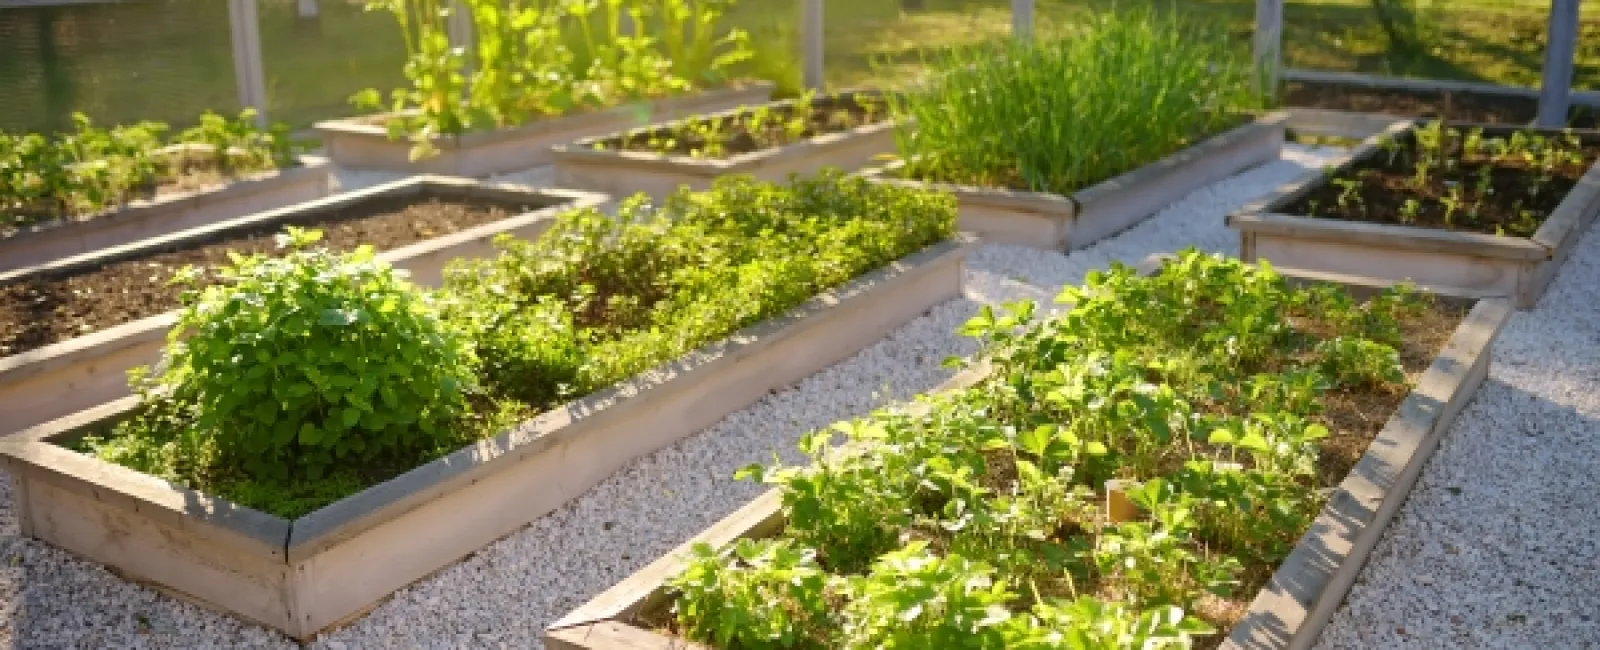 Tips for Sustainable Gardening and Landscaping